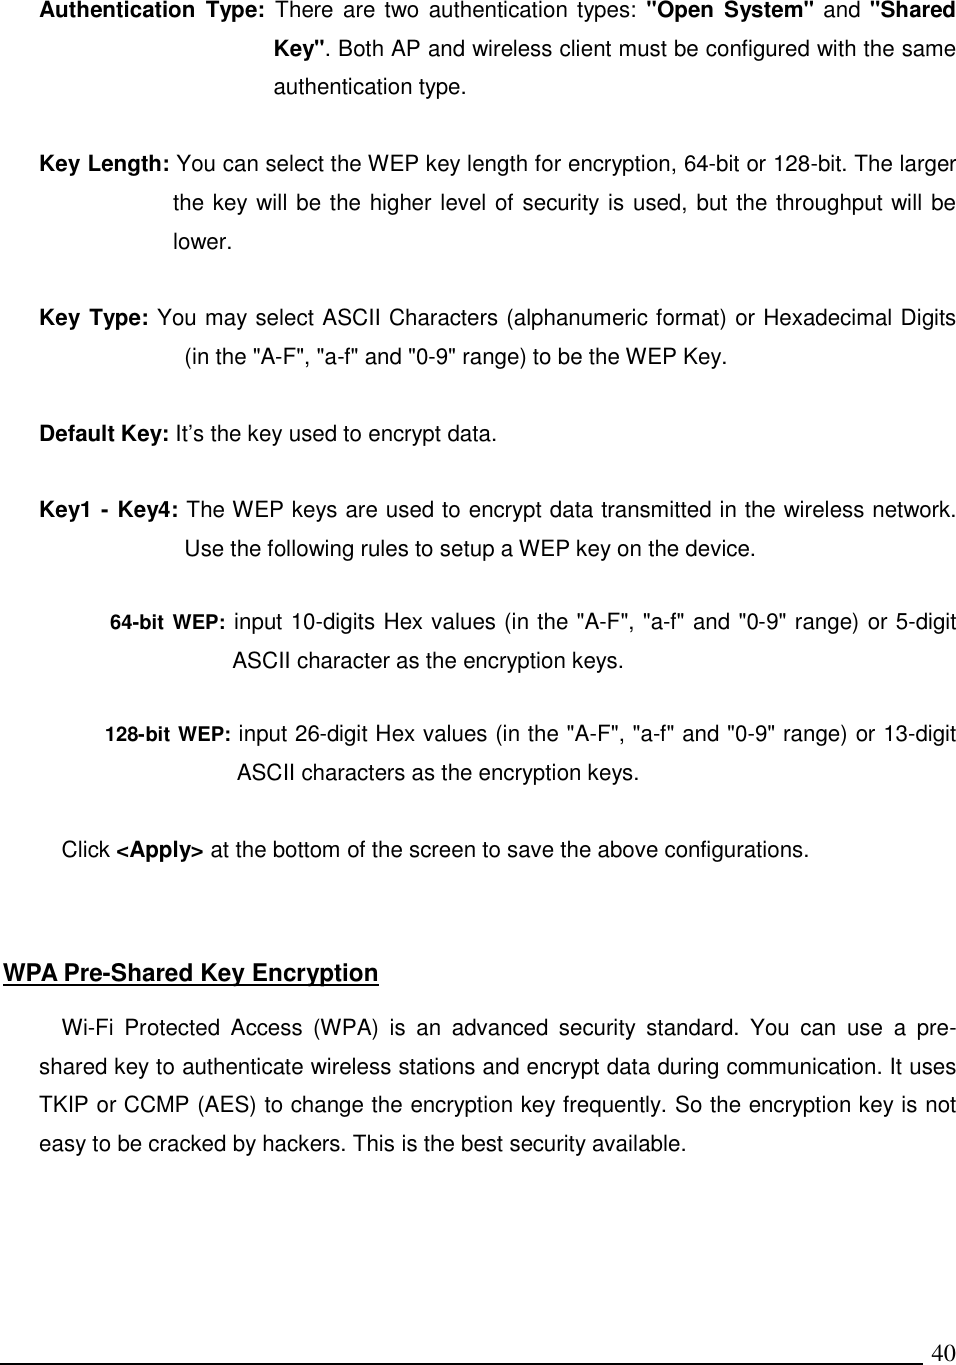   40 Authentication  Type:  There are two authentication types:  &quot;Open  System&quot; and &quot;Shared Key&quot;. Both AP and wireless client must be configured with the same authentication type.  Key Length: You can select the WEP key length for encryption, 64-bit or 128-bit. The larger the key will be the higher level of security is used, but the throughput will be lower.       Key Type: You may select ASCII Characters (alphanumeric format) or Hexadecimal Digits (in the &quot;A-F&quot;, &quot;a-f&quot; and &quot;0-9&quot; range) to be the WEP Key.  Default Key: It’s the key used to encrypt data.  Key1 - Key4: The WEP keys are used to encrypt data transmitted in the wireless network. Use the following rules to setup a WEP key on the device.   64-bit WEP: input 10-digits Hex values (in the &quot;A-F&quot;, &quot;a-f&quot; and &quot;0-9&quot; range) or 5-digit ASCII character as the encryption keys.   128-bit WEP: input 26-digit Hex values (in the &quot;A-F&quot;, &quot;a-f&quot; and &quot;0-9&quot; range) or 13-digit ASCII characters as the encryption keys.  Click &lt;Apply&gt; at the bottom of the screen to save the above configurations.     WPA Pre-Shared Key Encryption  Wi-Fi  Protected  Access  (WPA)  is  an  advanced  security  standard.  You  can  use  a  pre-shared key to authenticate wireless stations and encrypt data during communication. It uses TKIP or CCMP (AES) to change the encryption key frequently. So the encryption key is not easy to be cracked by hackers. This is the best security available.  